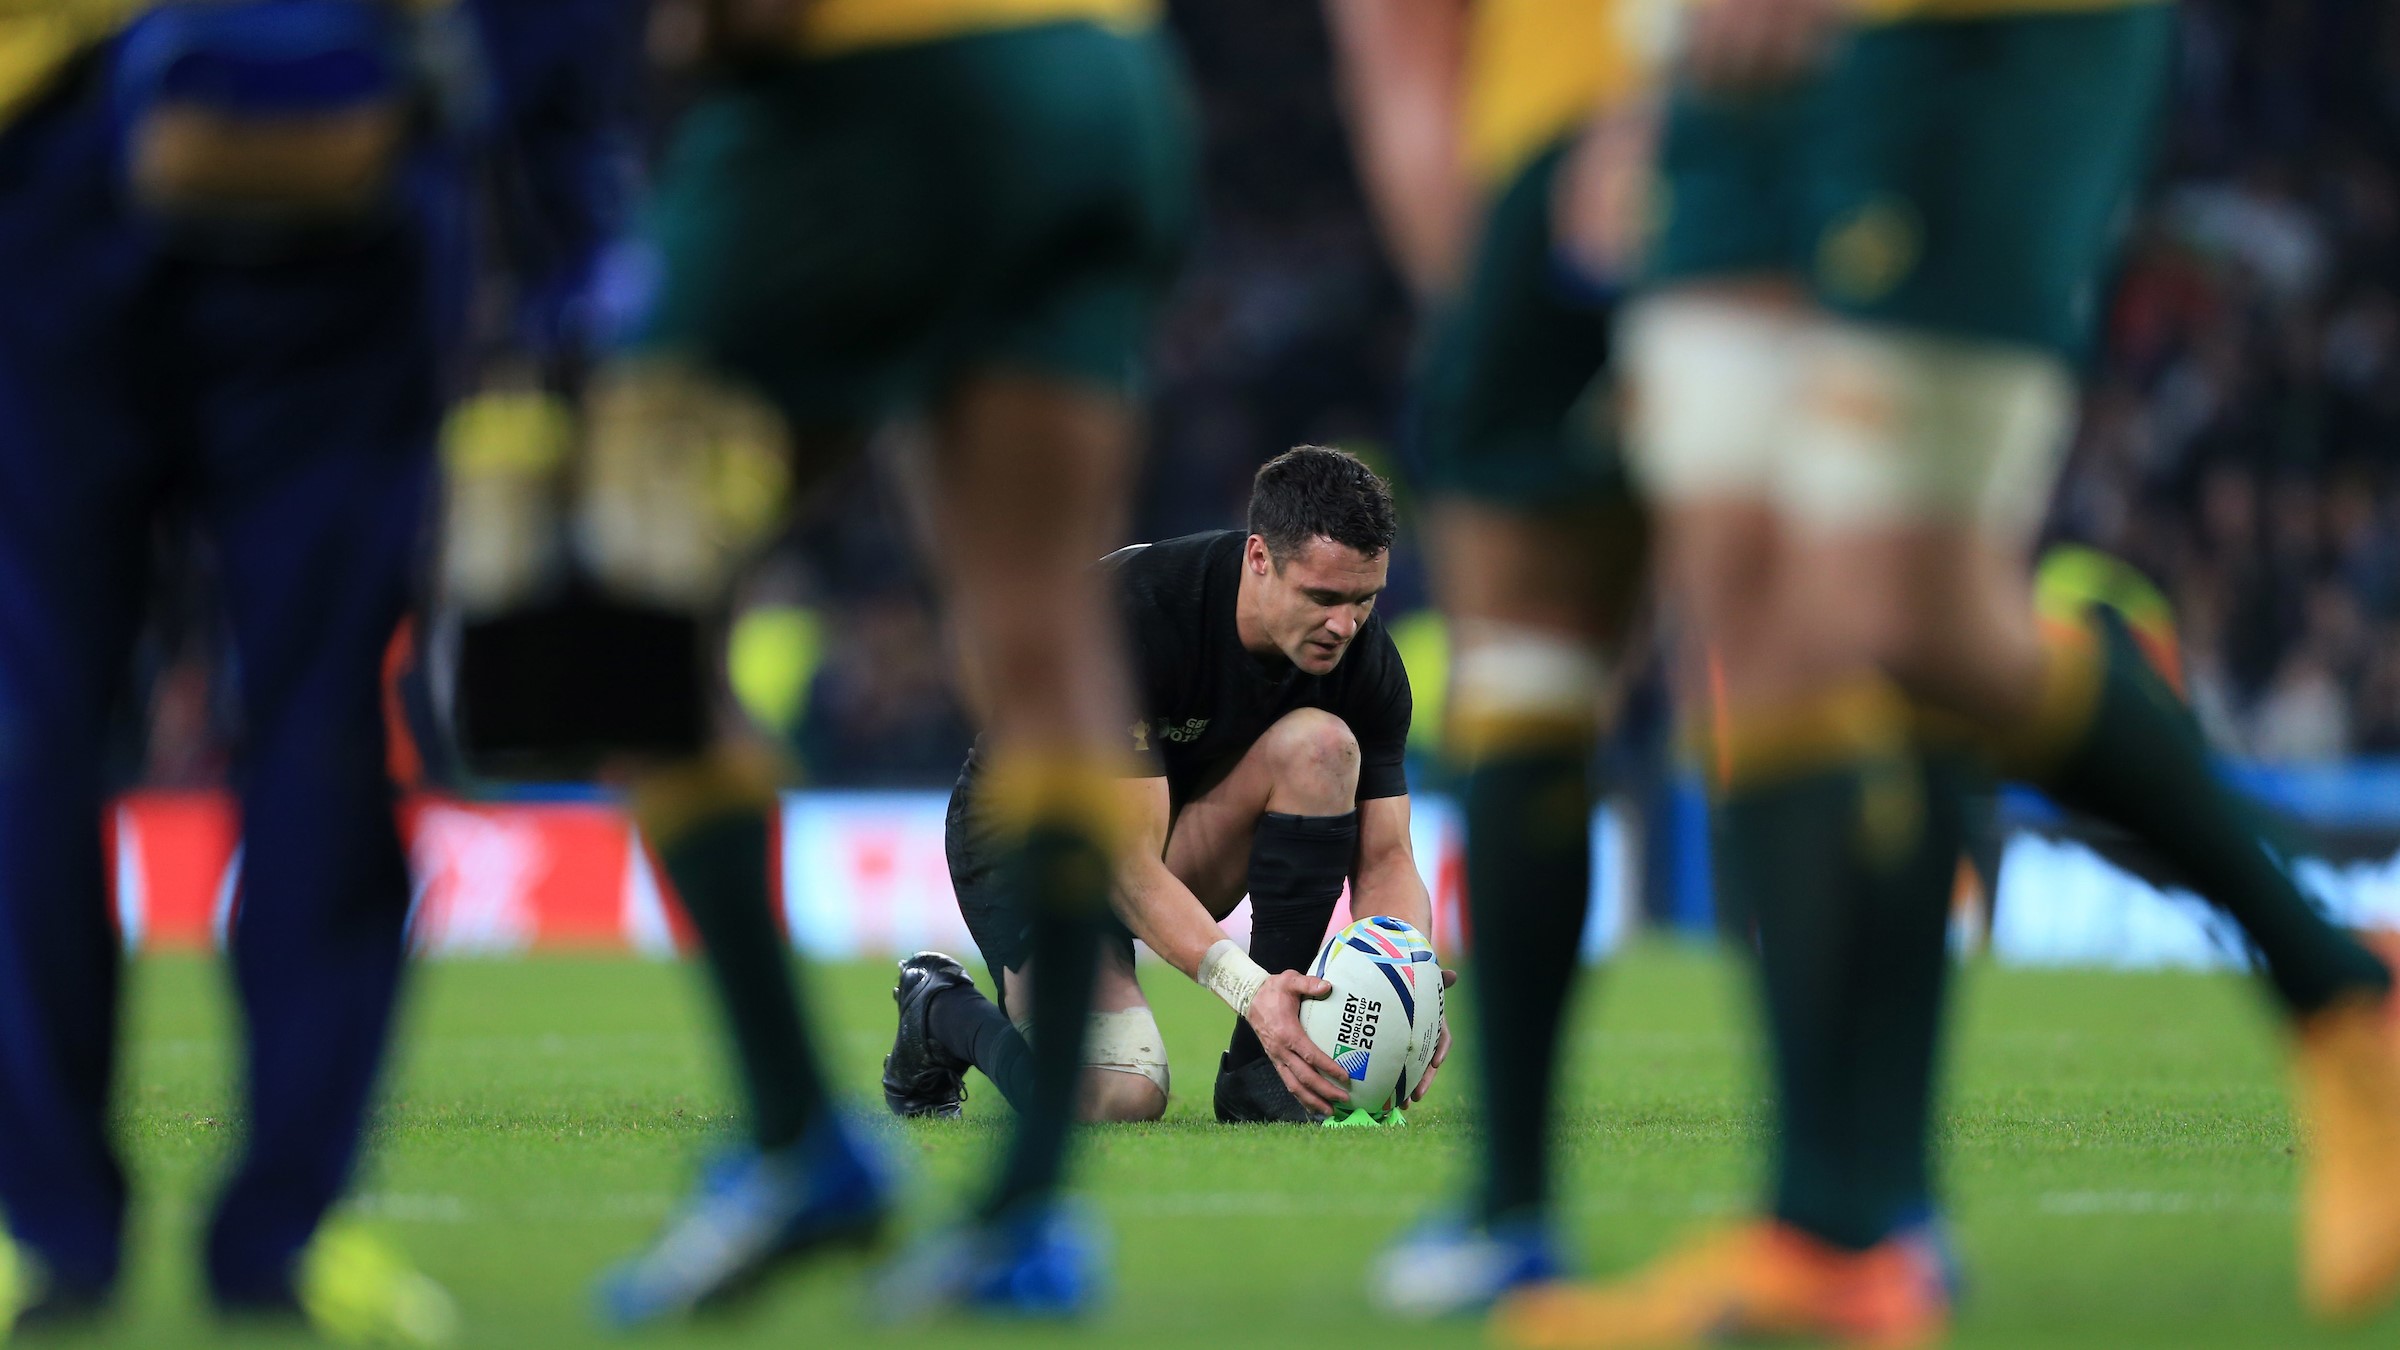 All Blacks' Dan Carter becomes first rugby union player to reach